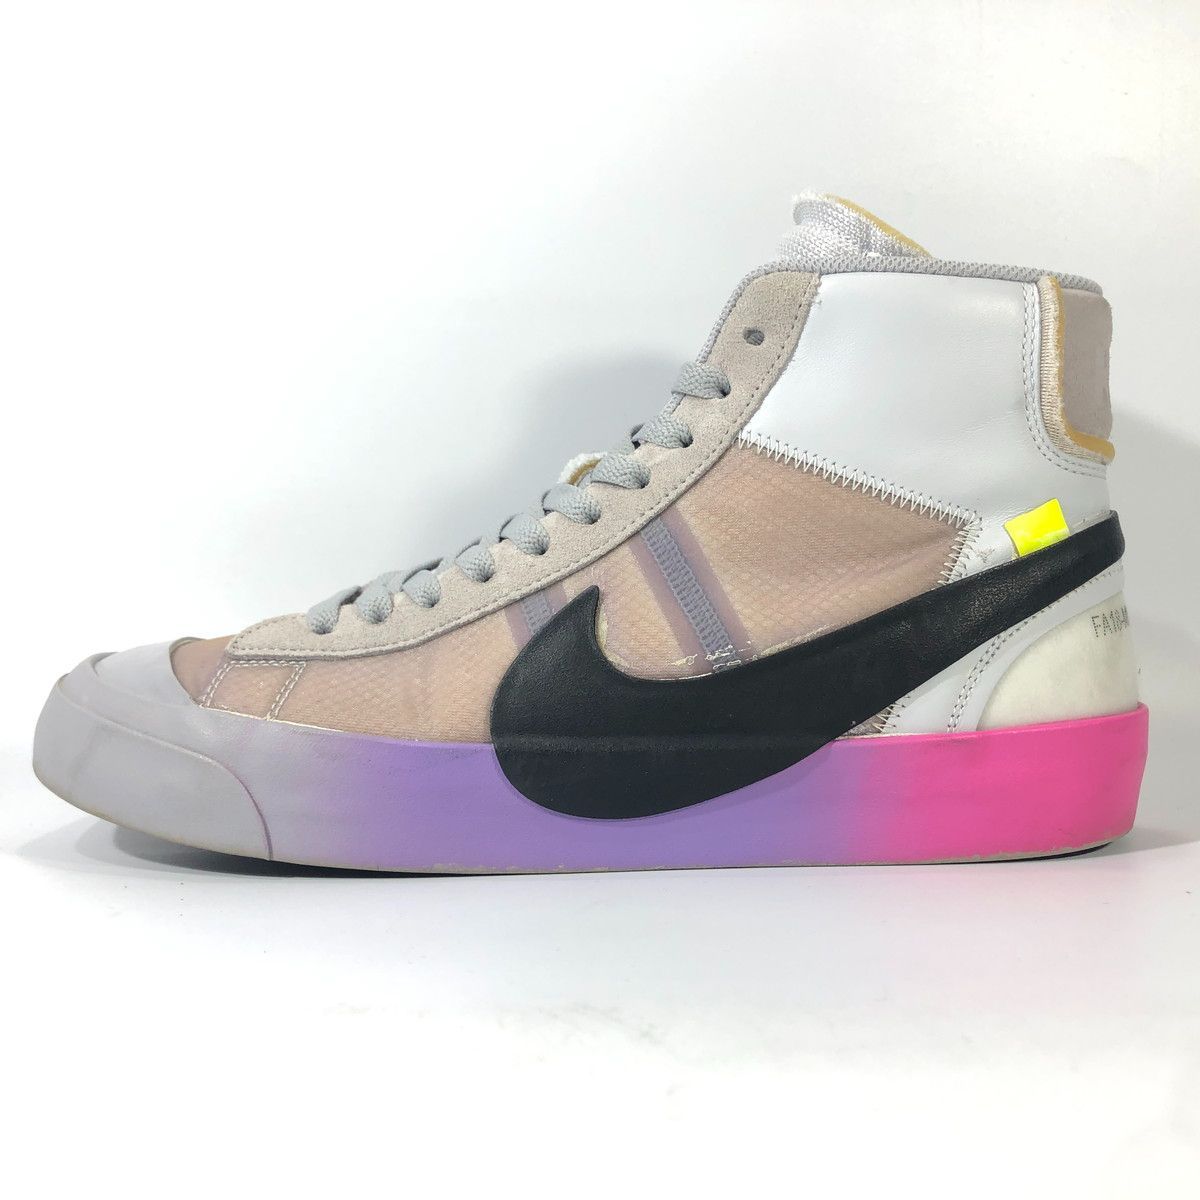 Serena Williams Off-White Nike BLAZER MID QUEEN AA3832-002 28.0cm US10 宅急便